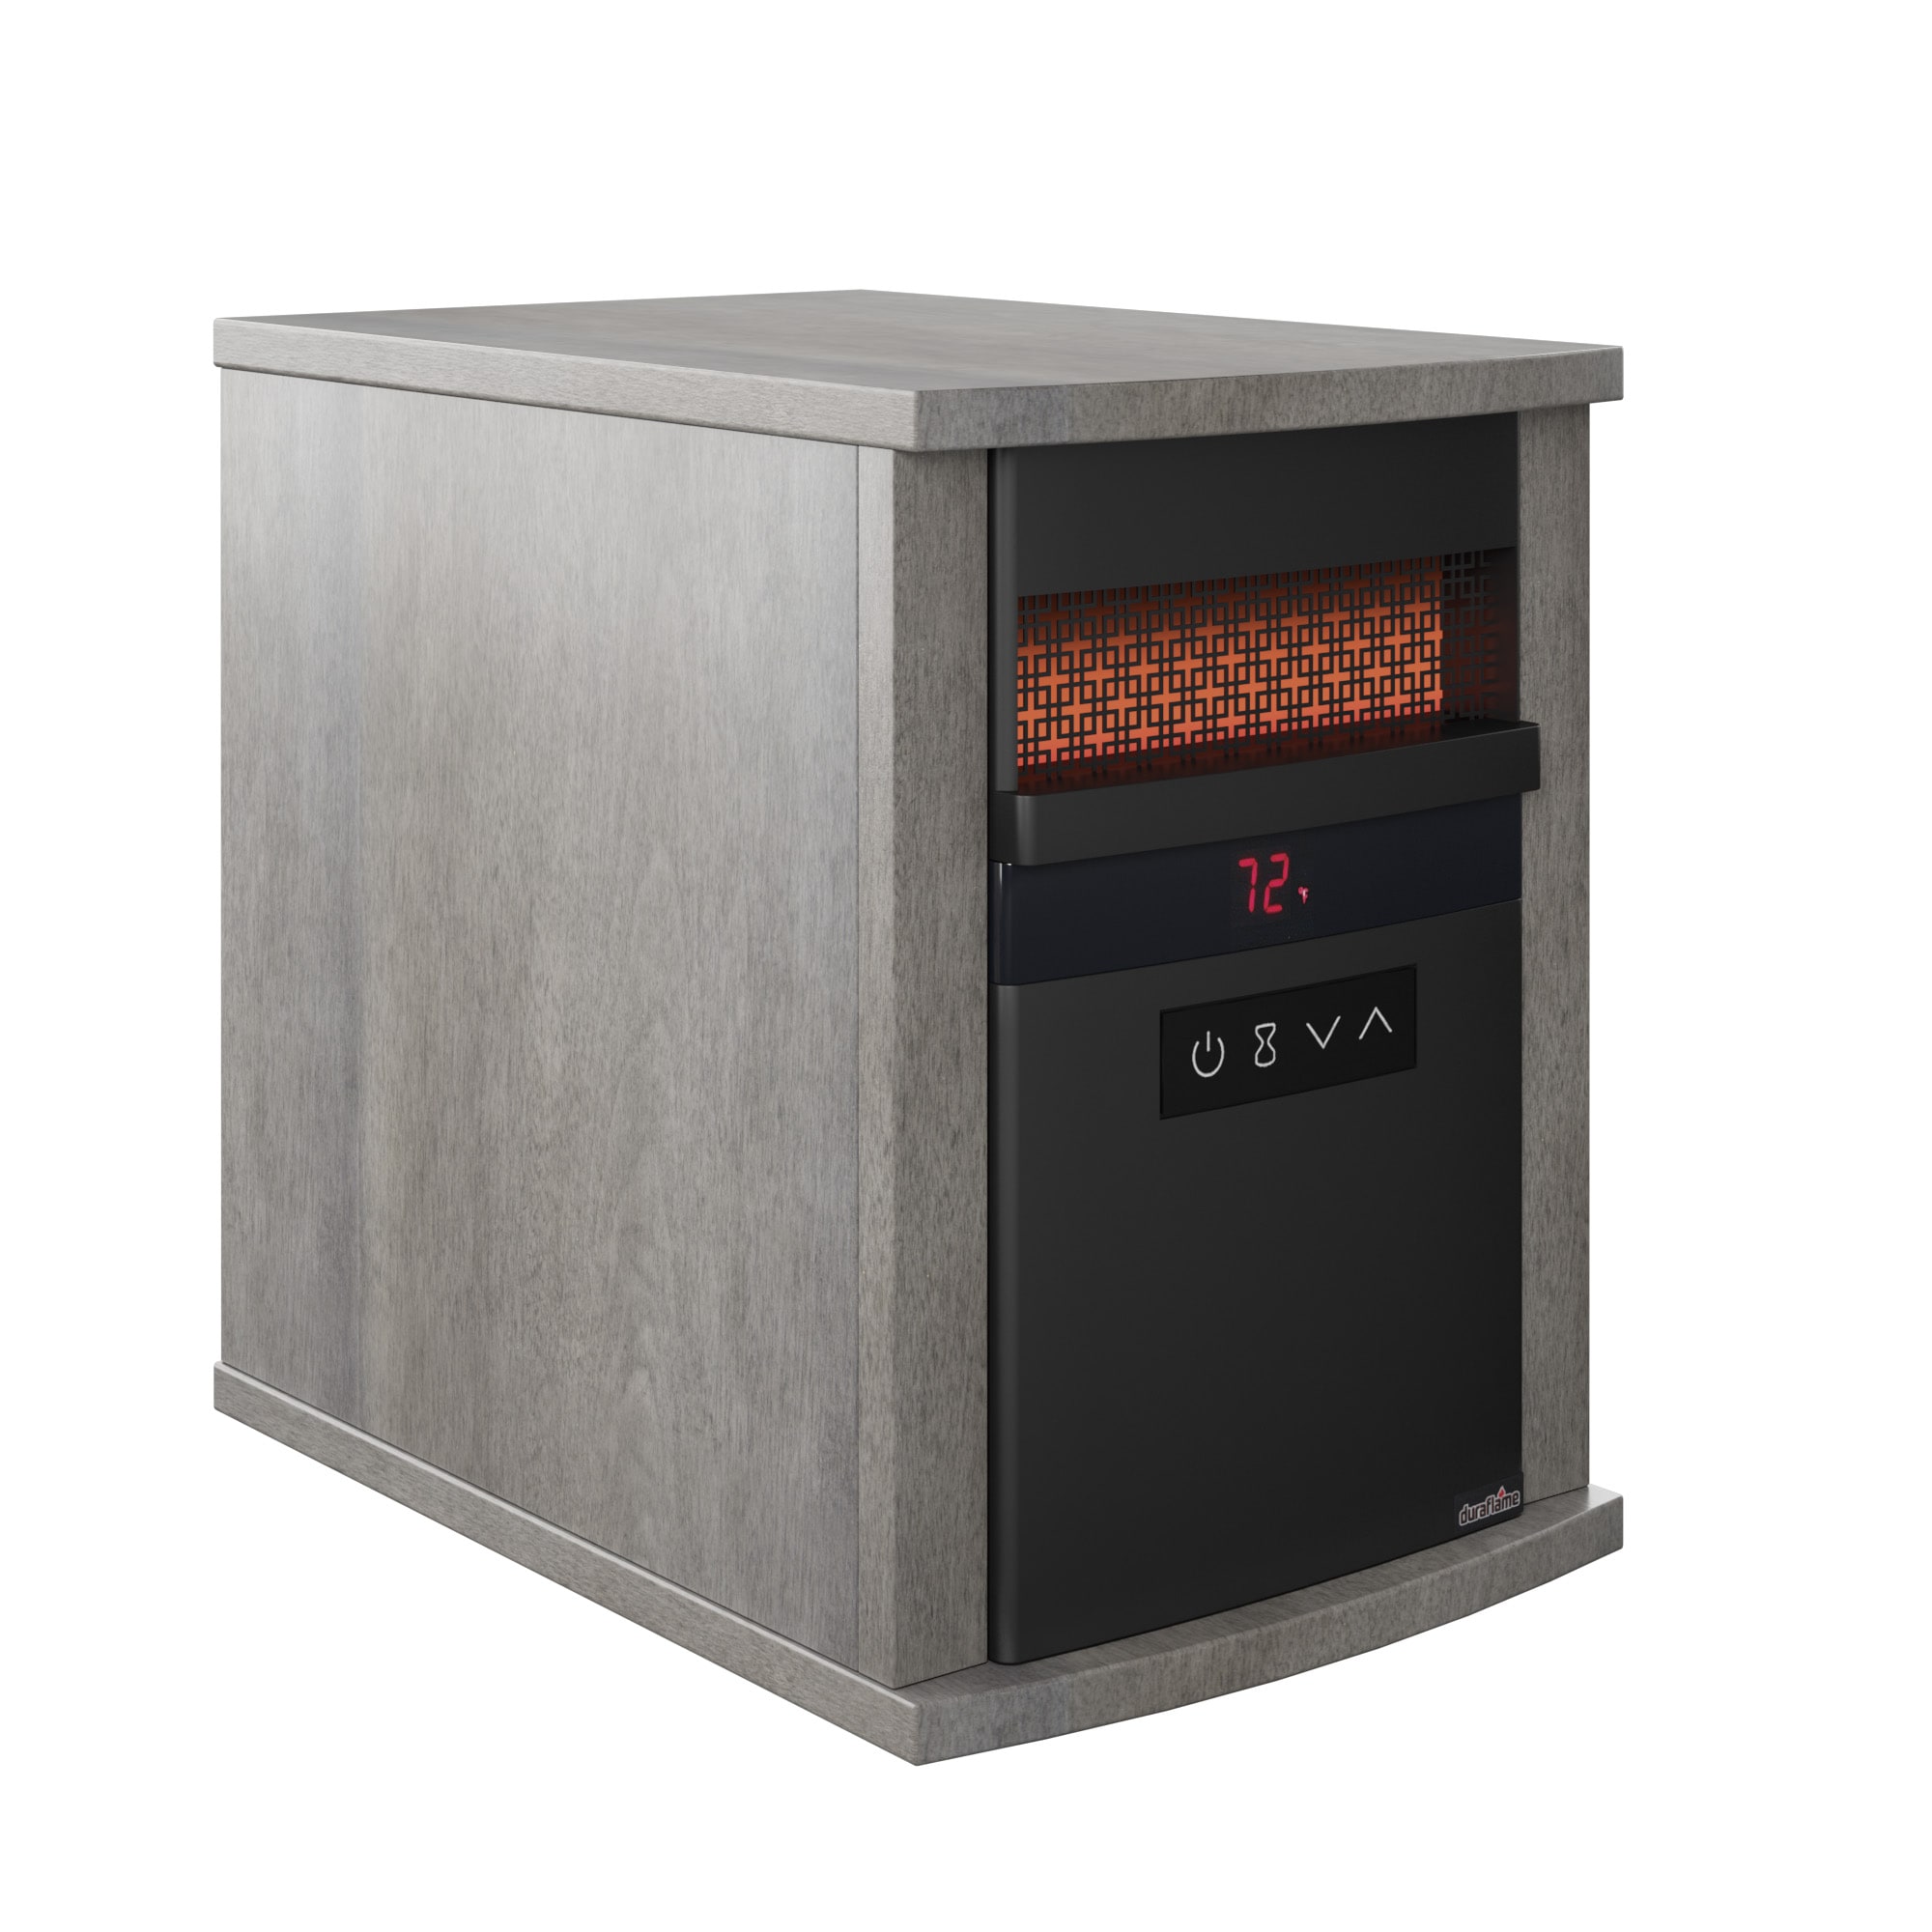 Up to 1500-Watt Infrared Cabinet Indoor Electric Space Heater with Thermostat and Remote Included in Gray | - Duraflame 9HM900-B523